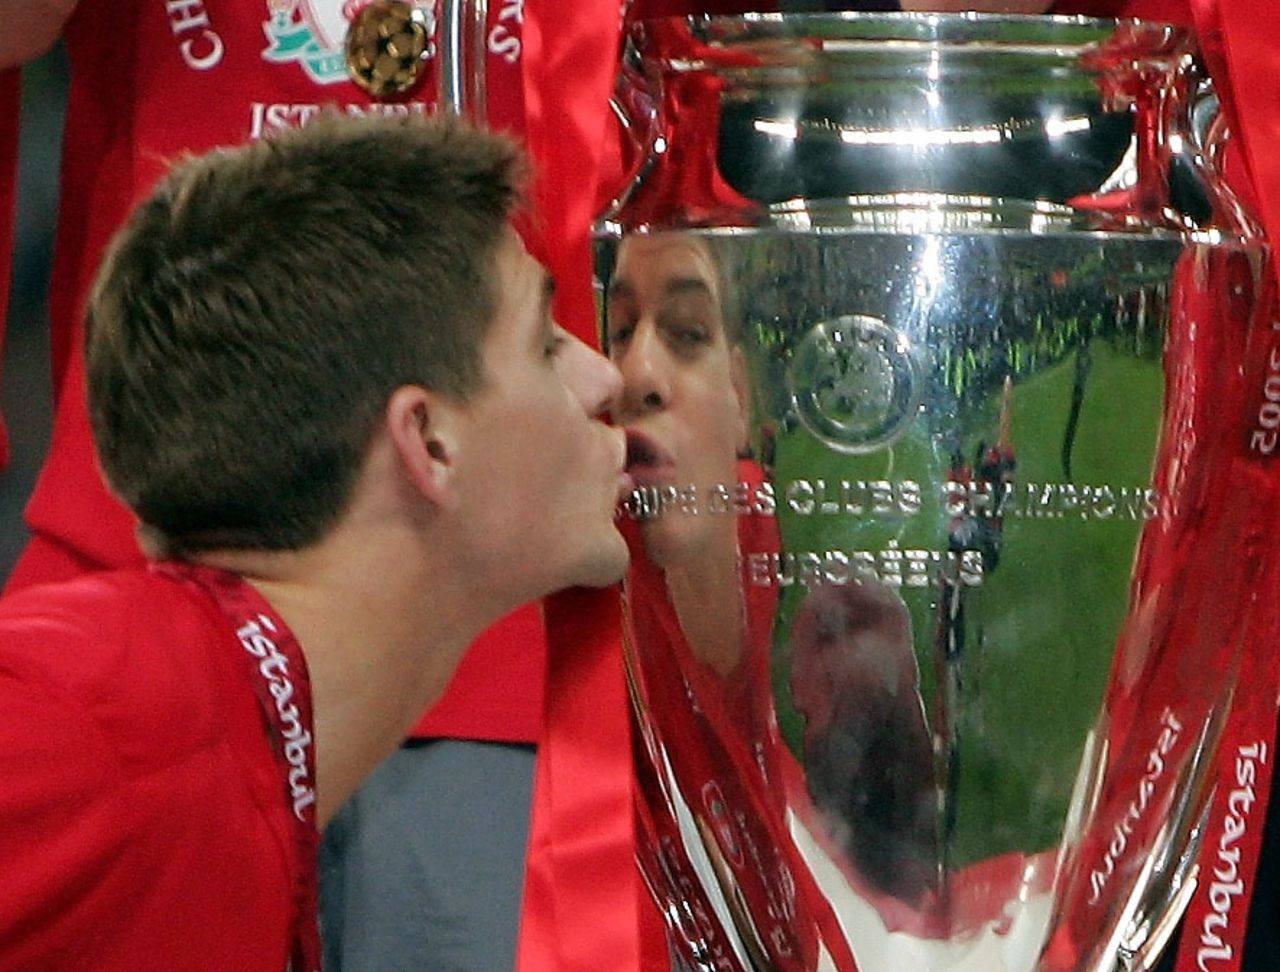 Gerrard lifted the cup and even took it to bed with him after the game following the dramatic victory. As for Milan, midfielder Andrea Pirlo summed it up best in his autobiography.  "There are always lessons to be found in the darkest moments," he wrote. "It's a moral obligation to dig deep and find that little glimmer of hope or pearl of wisdom. You might hit upon an elegant phrase that stays with you and makes the journey that little bit less bitter. I've tried with Istanbul and haven't managed to get beyond these words: For f**** sake."